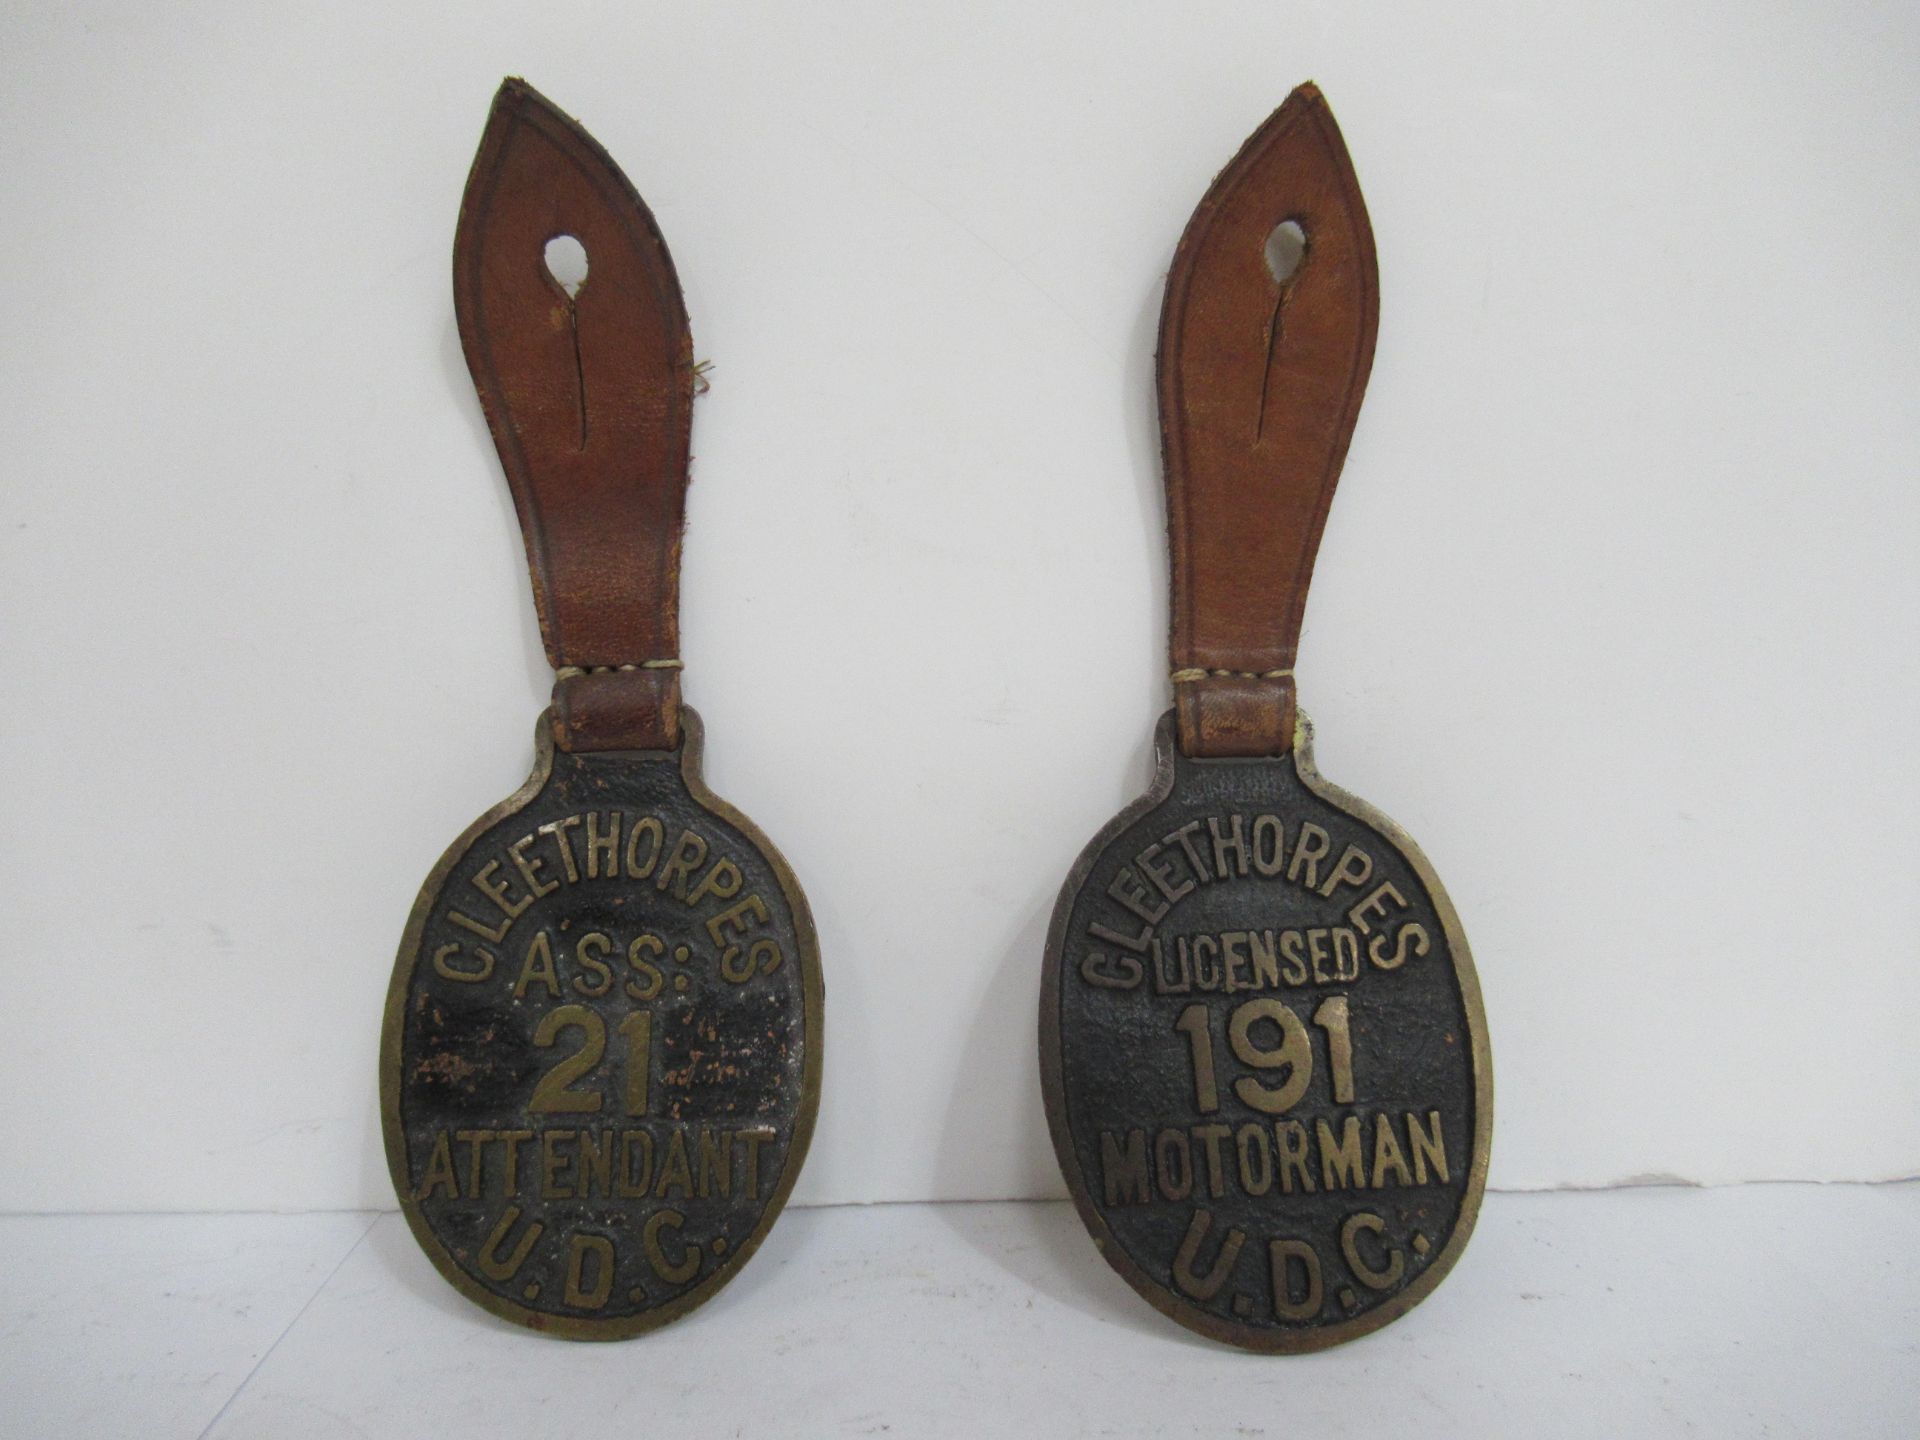 2x Brass Cleethorpes U.D.C 'Attendant' and 'Motorman' wall hanging medallions